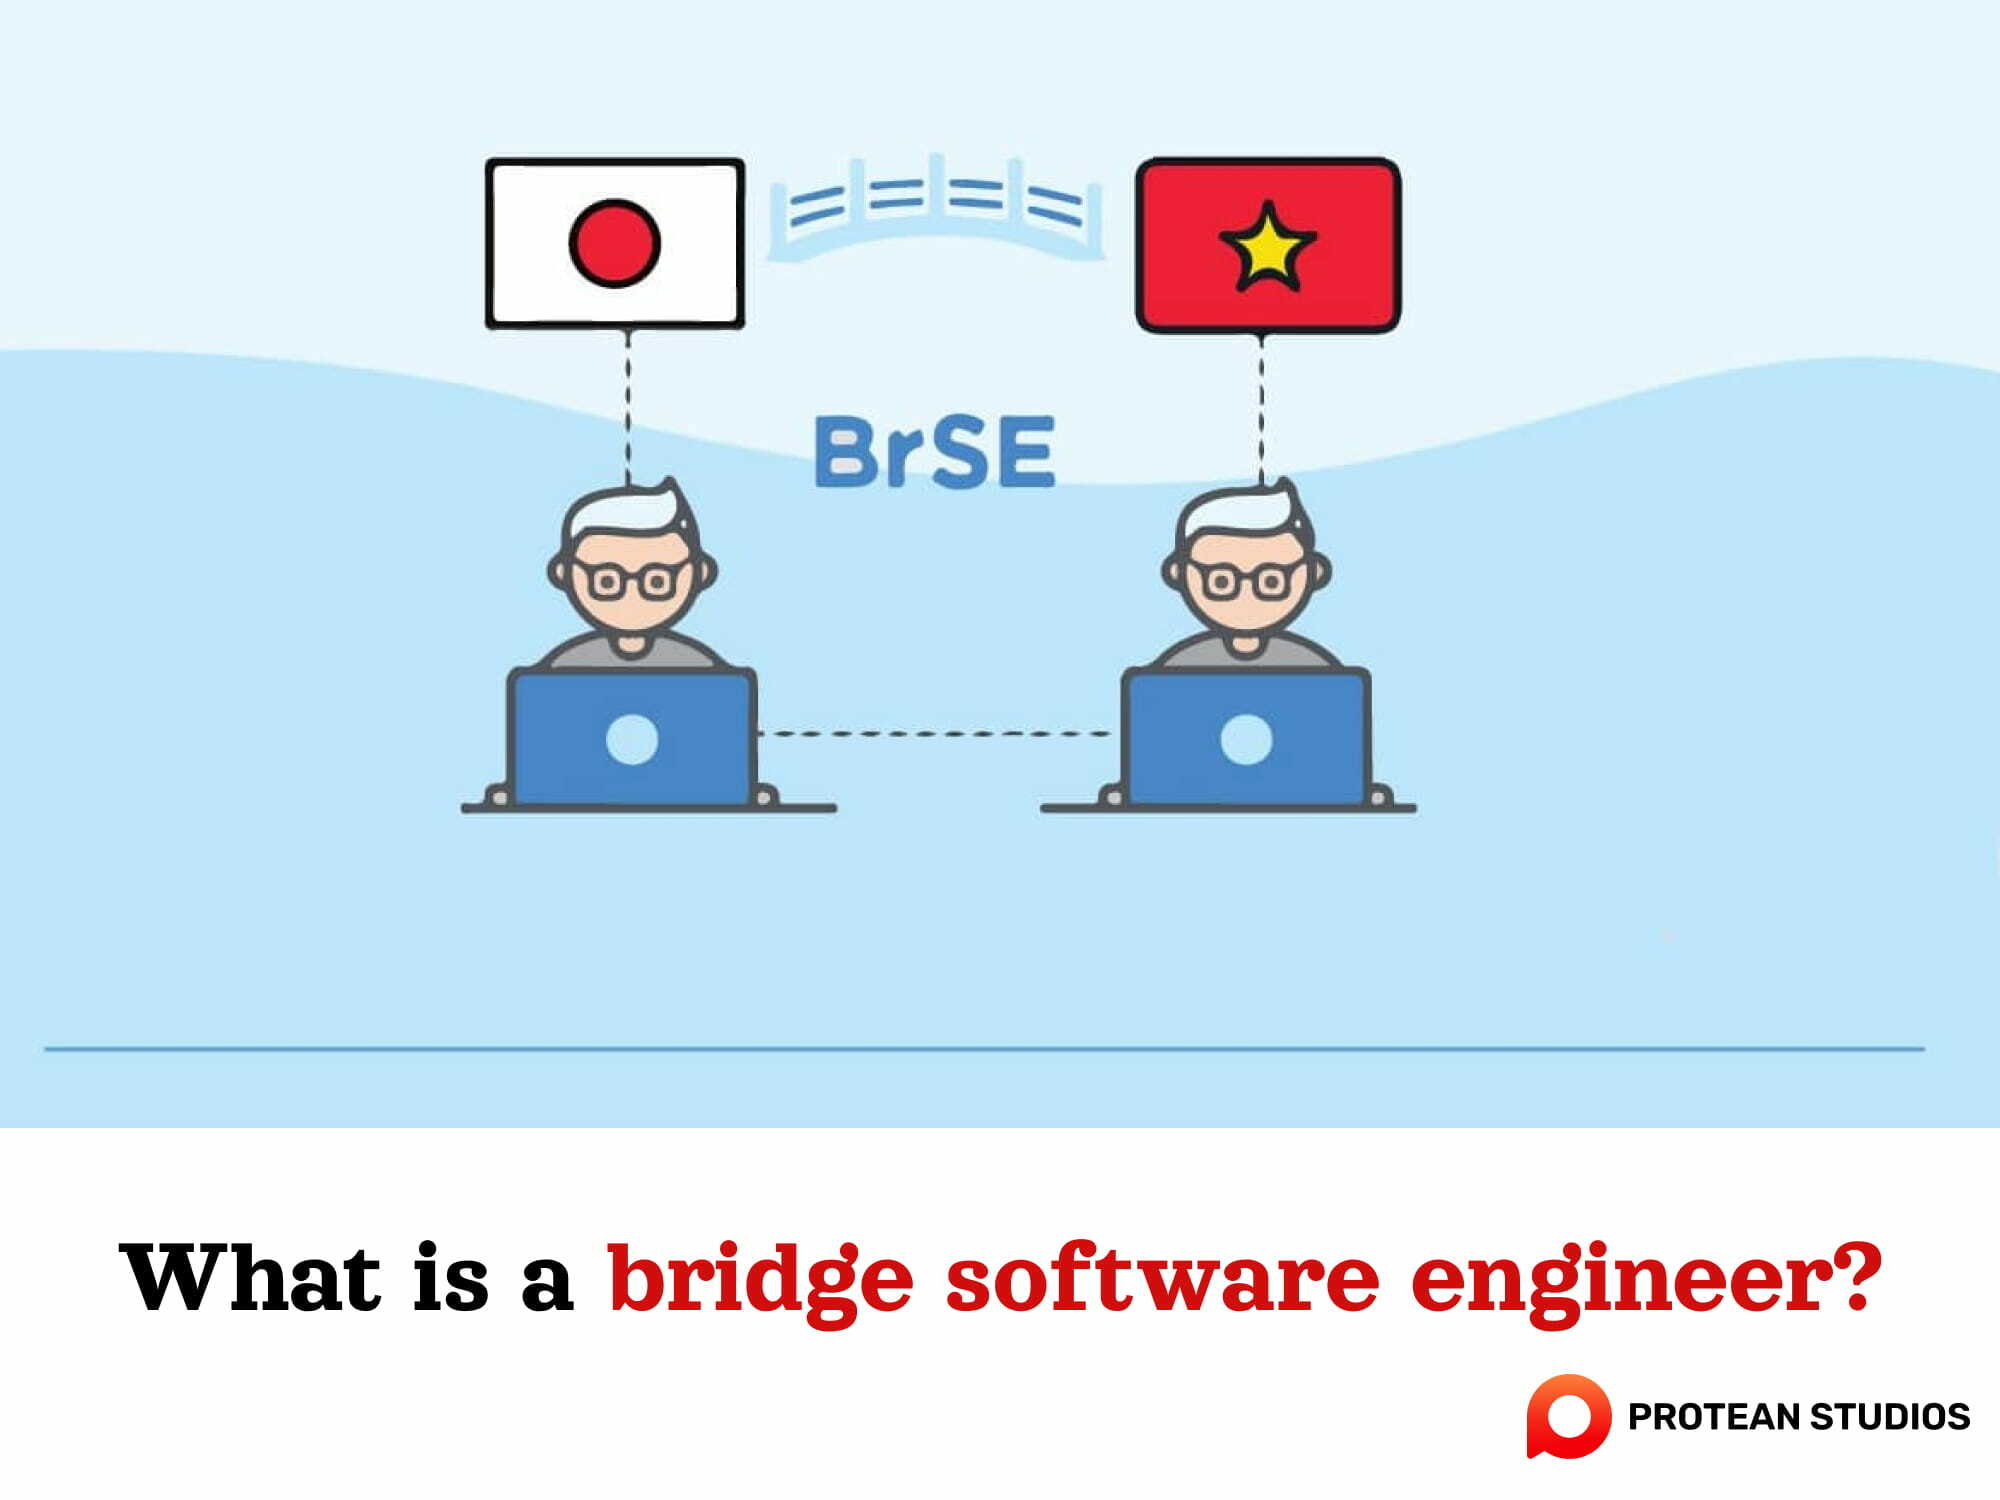 About a bridge software engineer in offshore projects